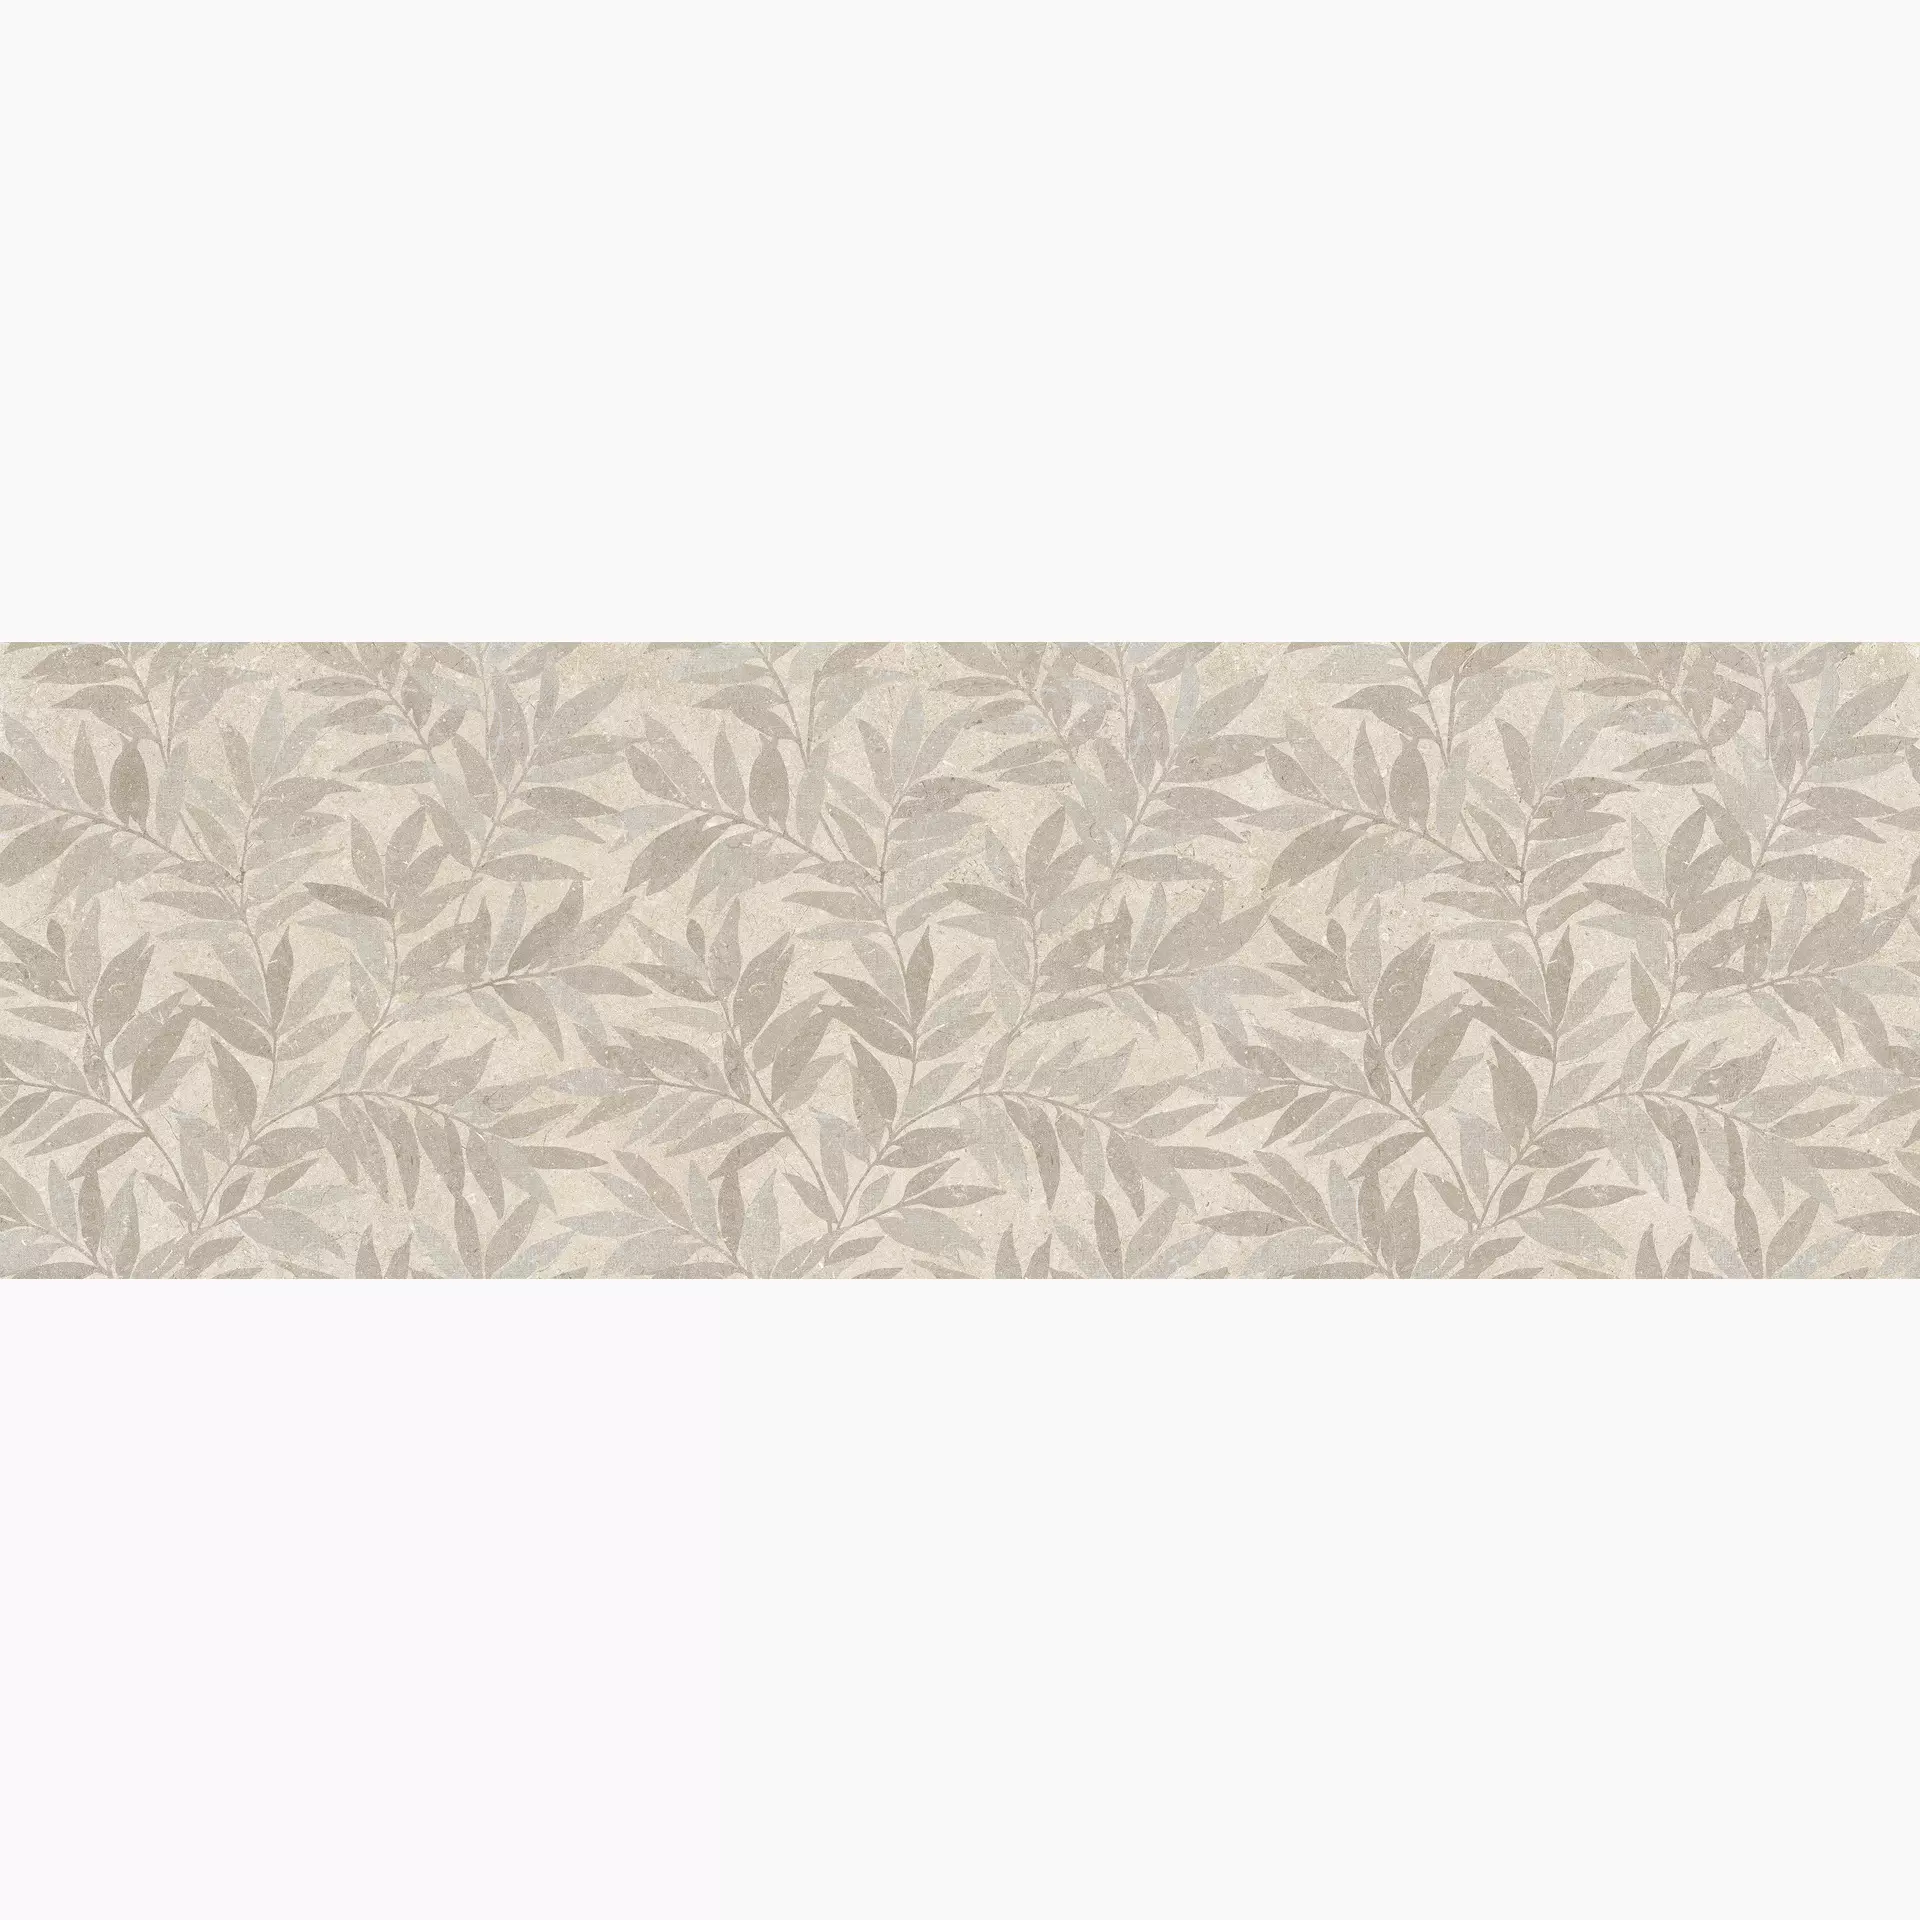 Marazzi Limestone Wall Sand – Taupe Touch Decor Agrifolgio MFDT 40x120cm rectified 6mm